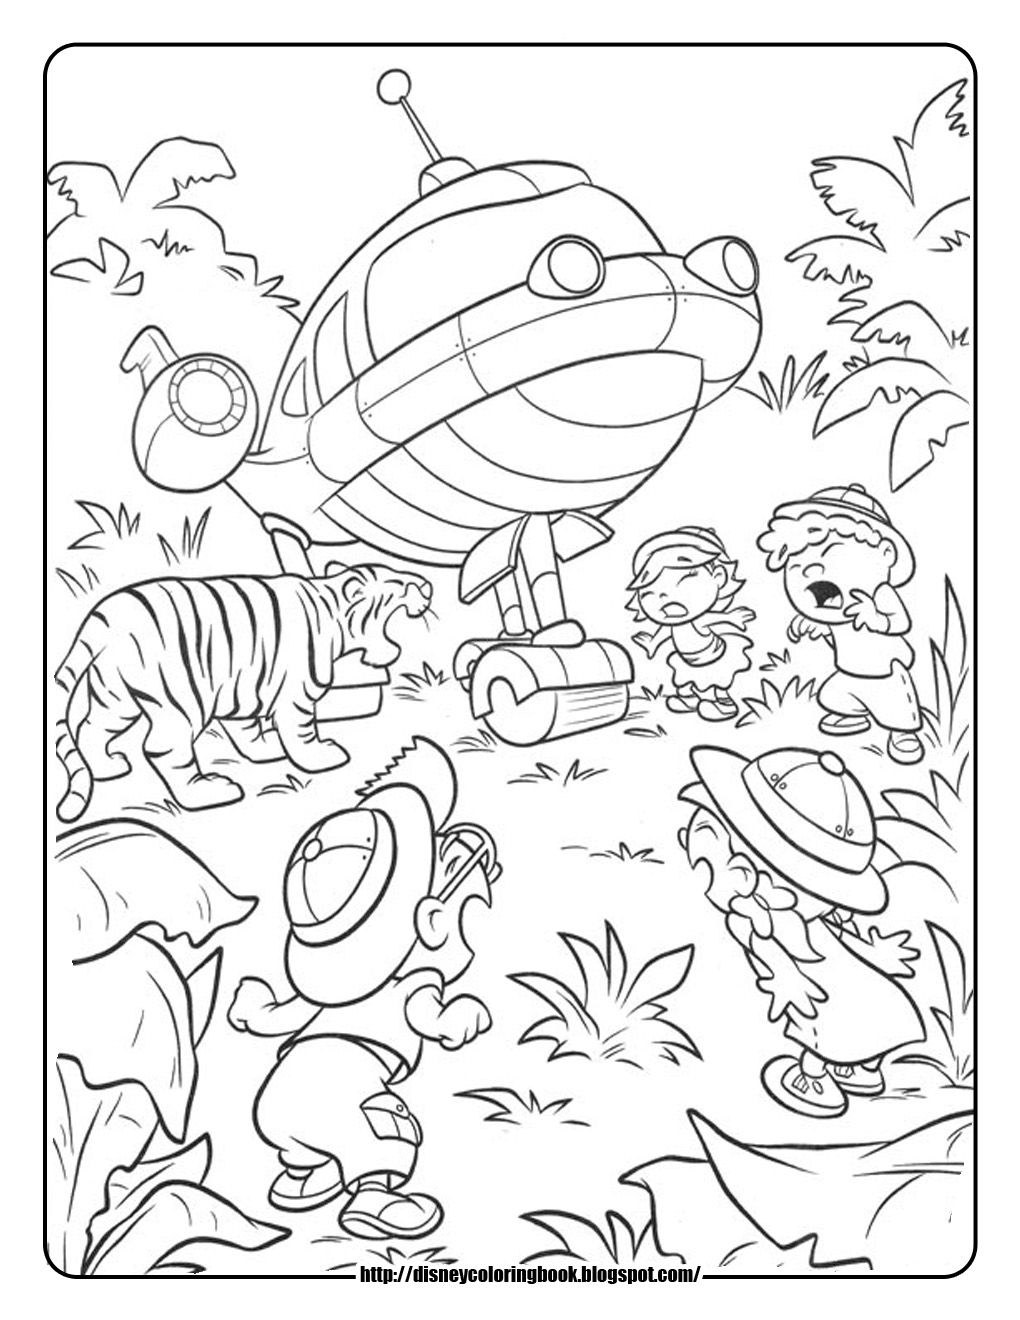 Little Einsteins 4: Free Disney Coloring Sheets | Learn To Coloring